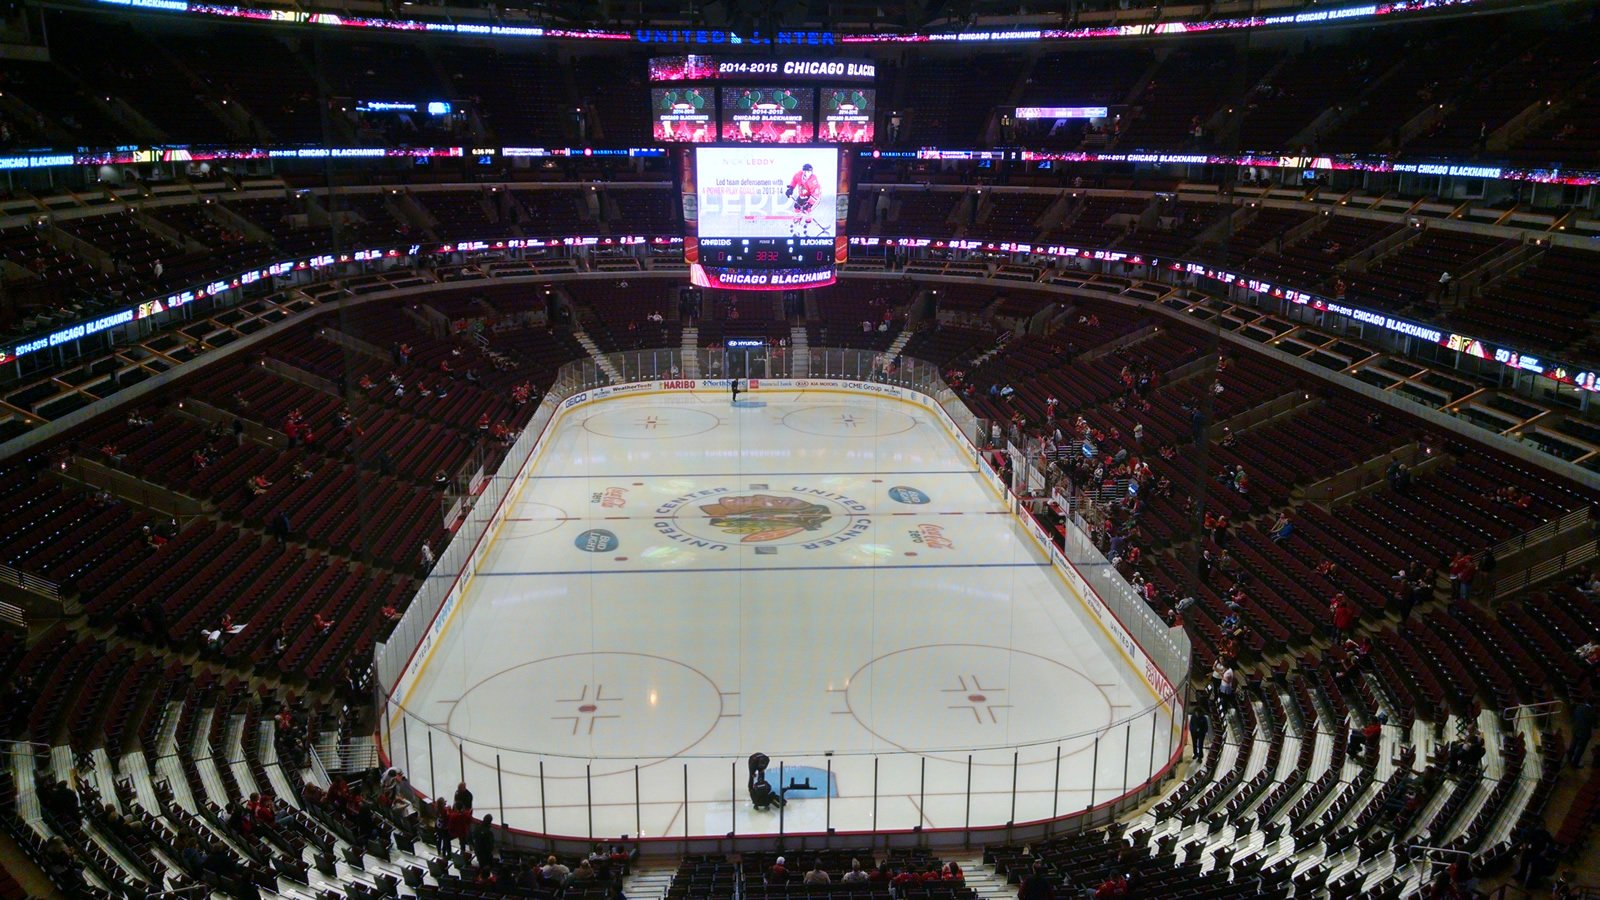 https://www.rateyourseats.com/assets/images/forblog/hockey-best-seats/united-center-behind-the-net-seating.jpg